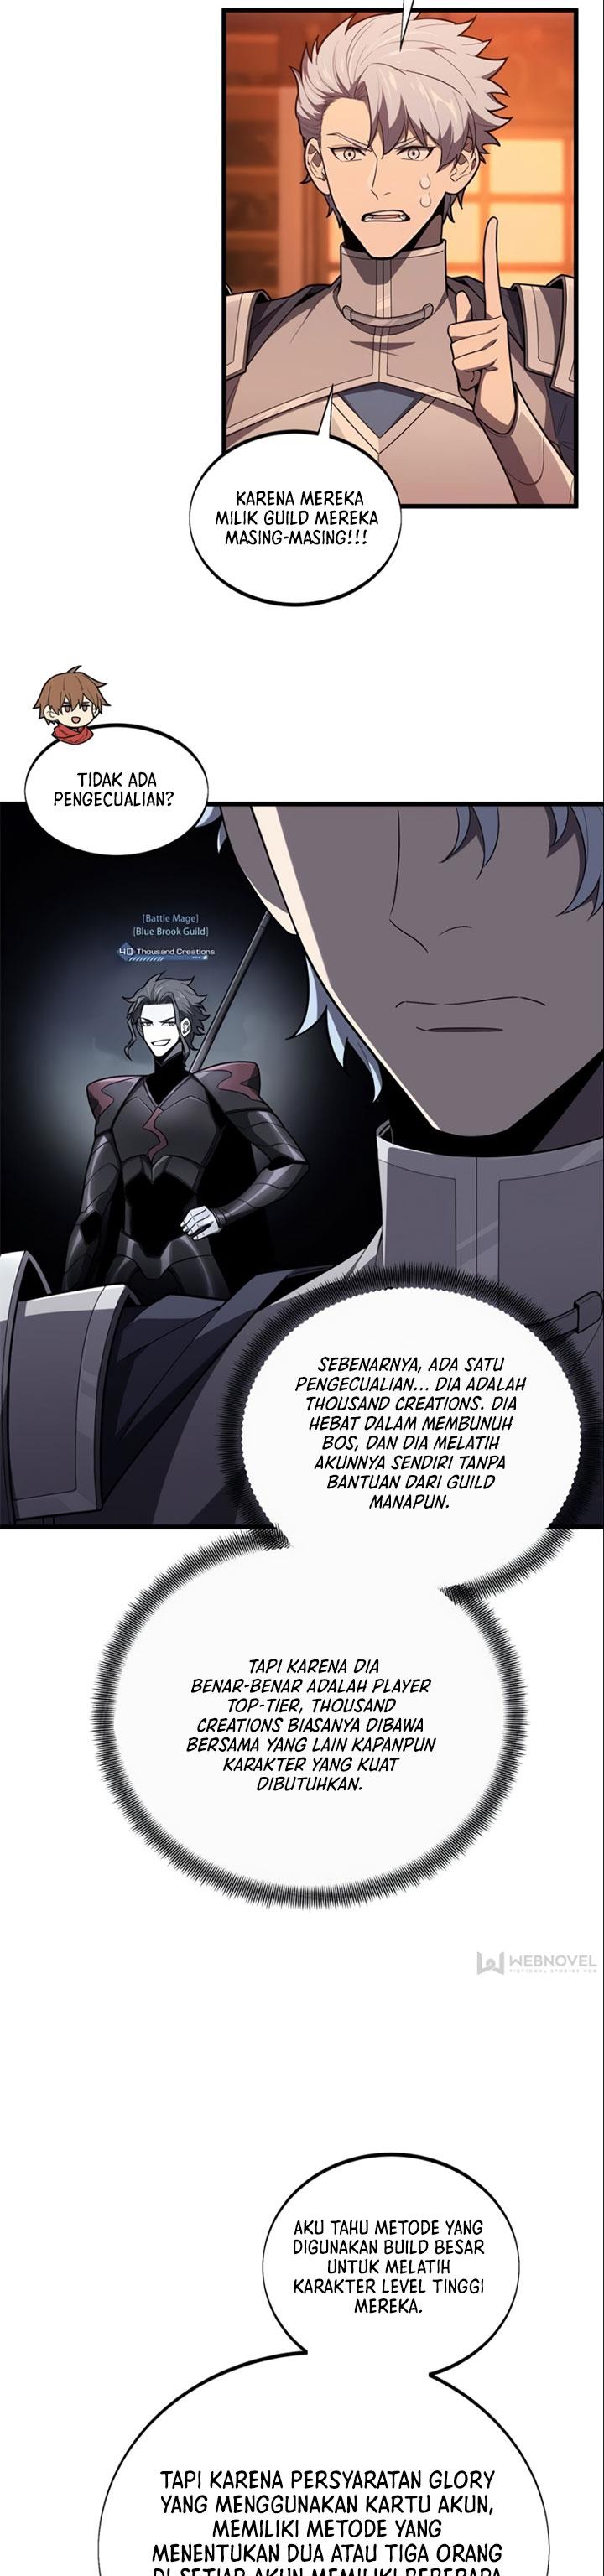 The King’s Avatar Chapter 127